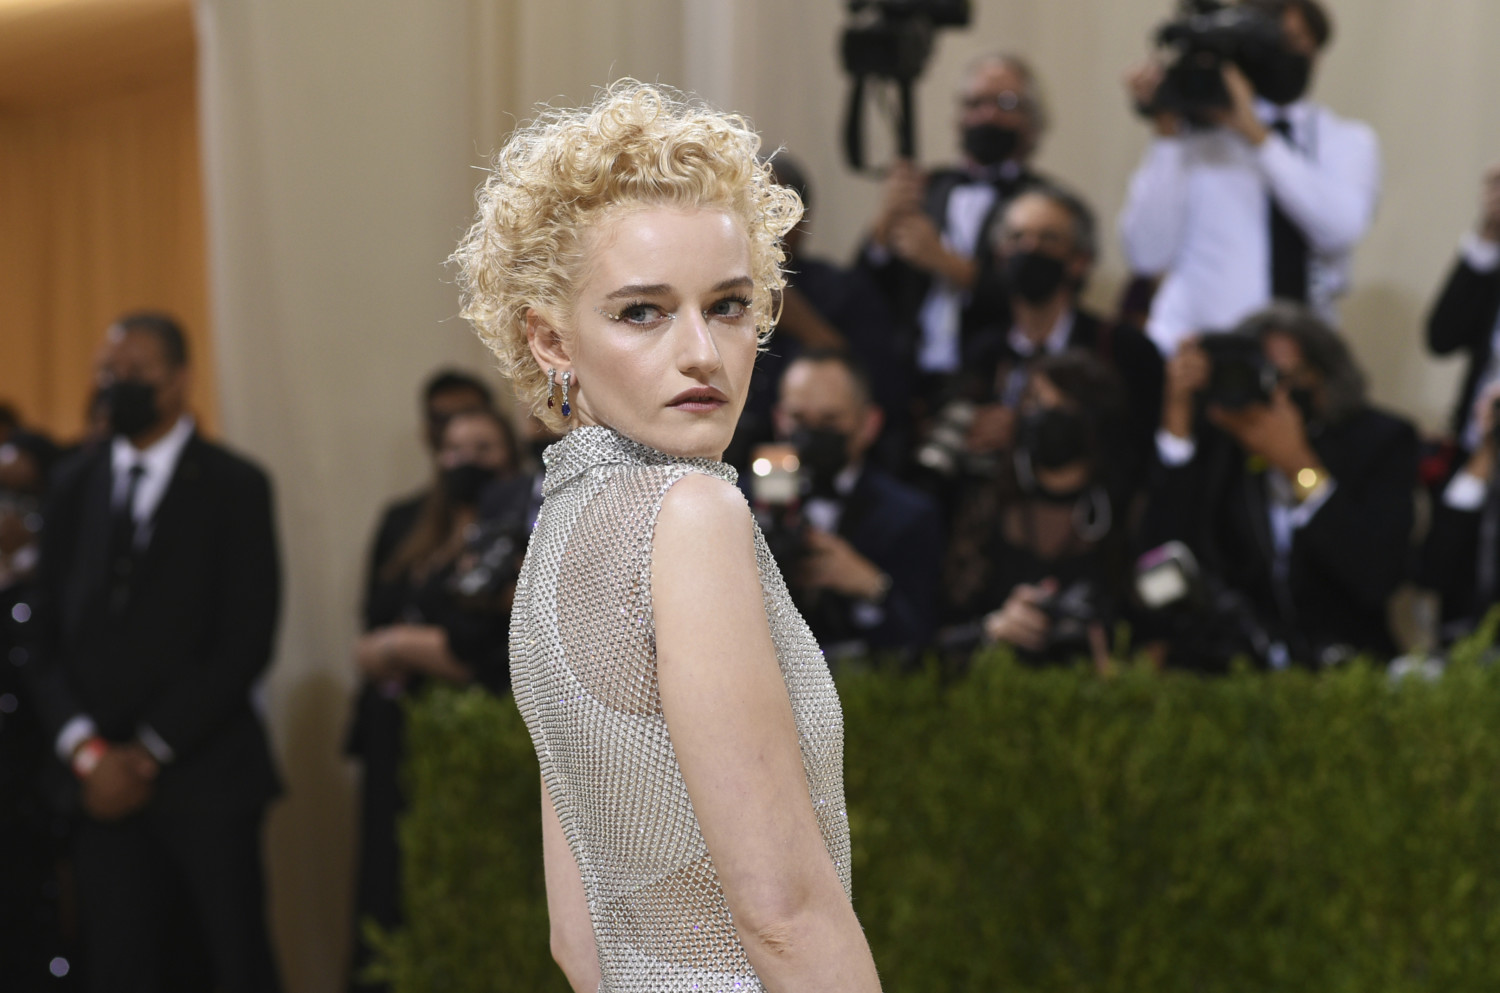 Actor Julia Garner, who will play Madonna in biopic